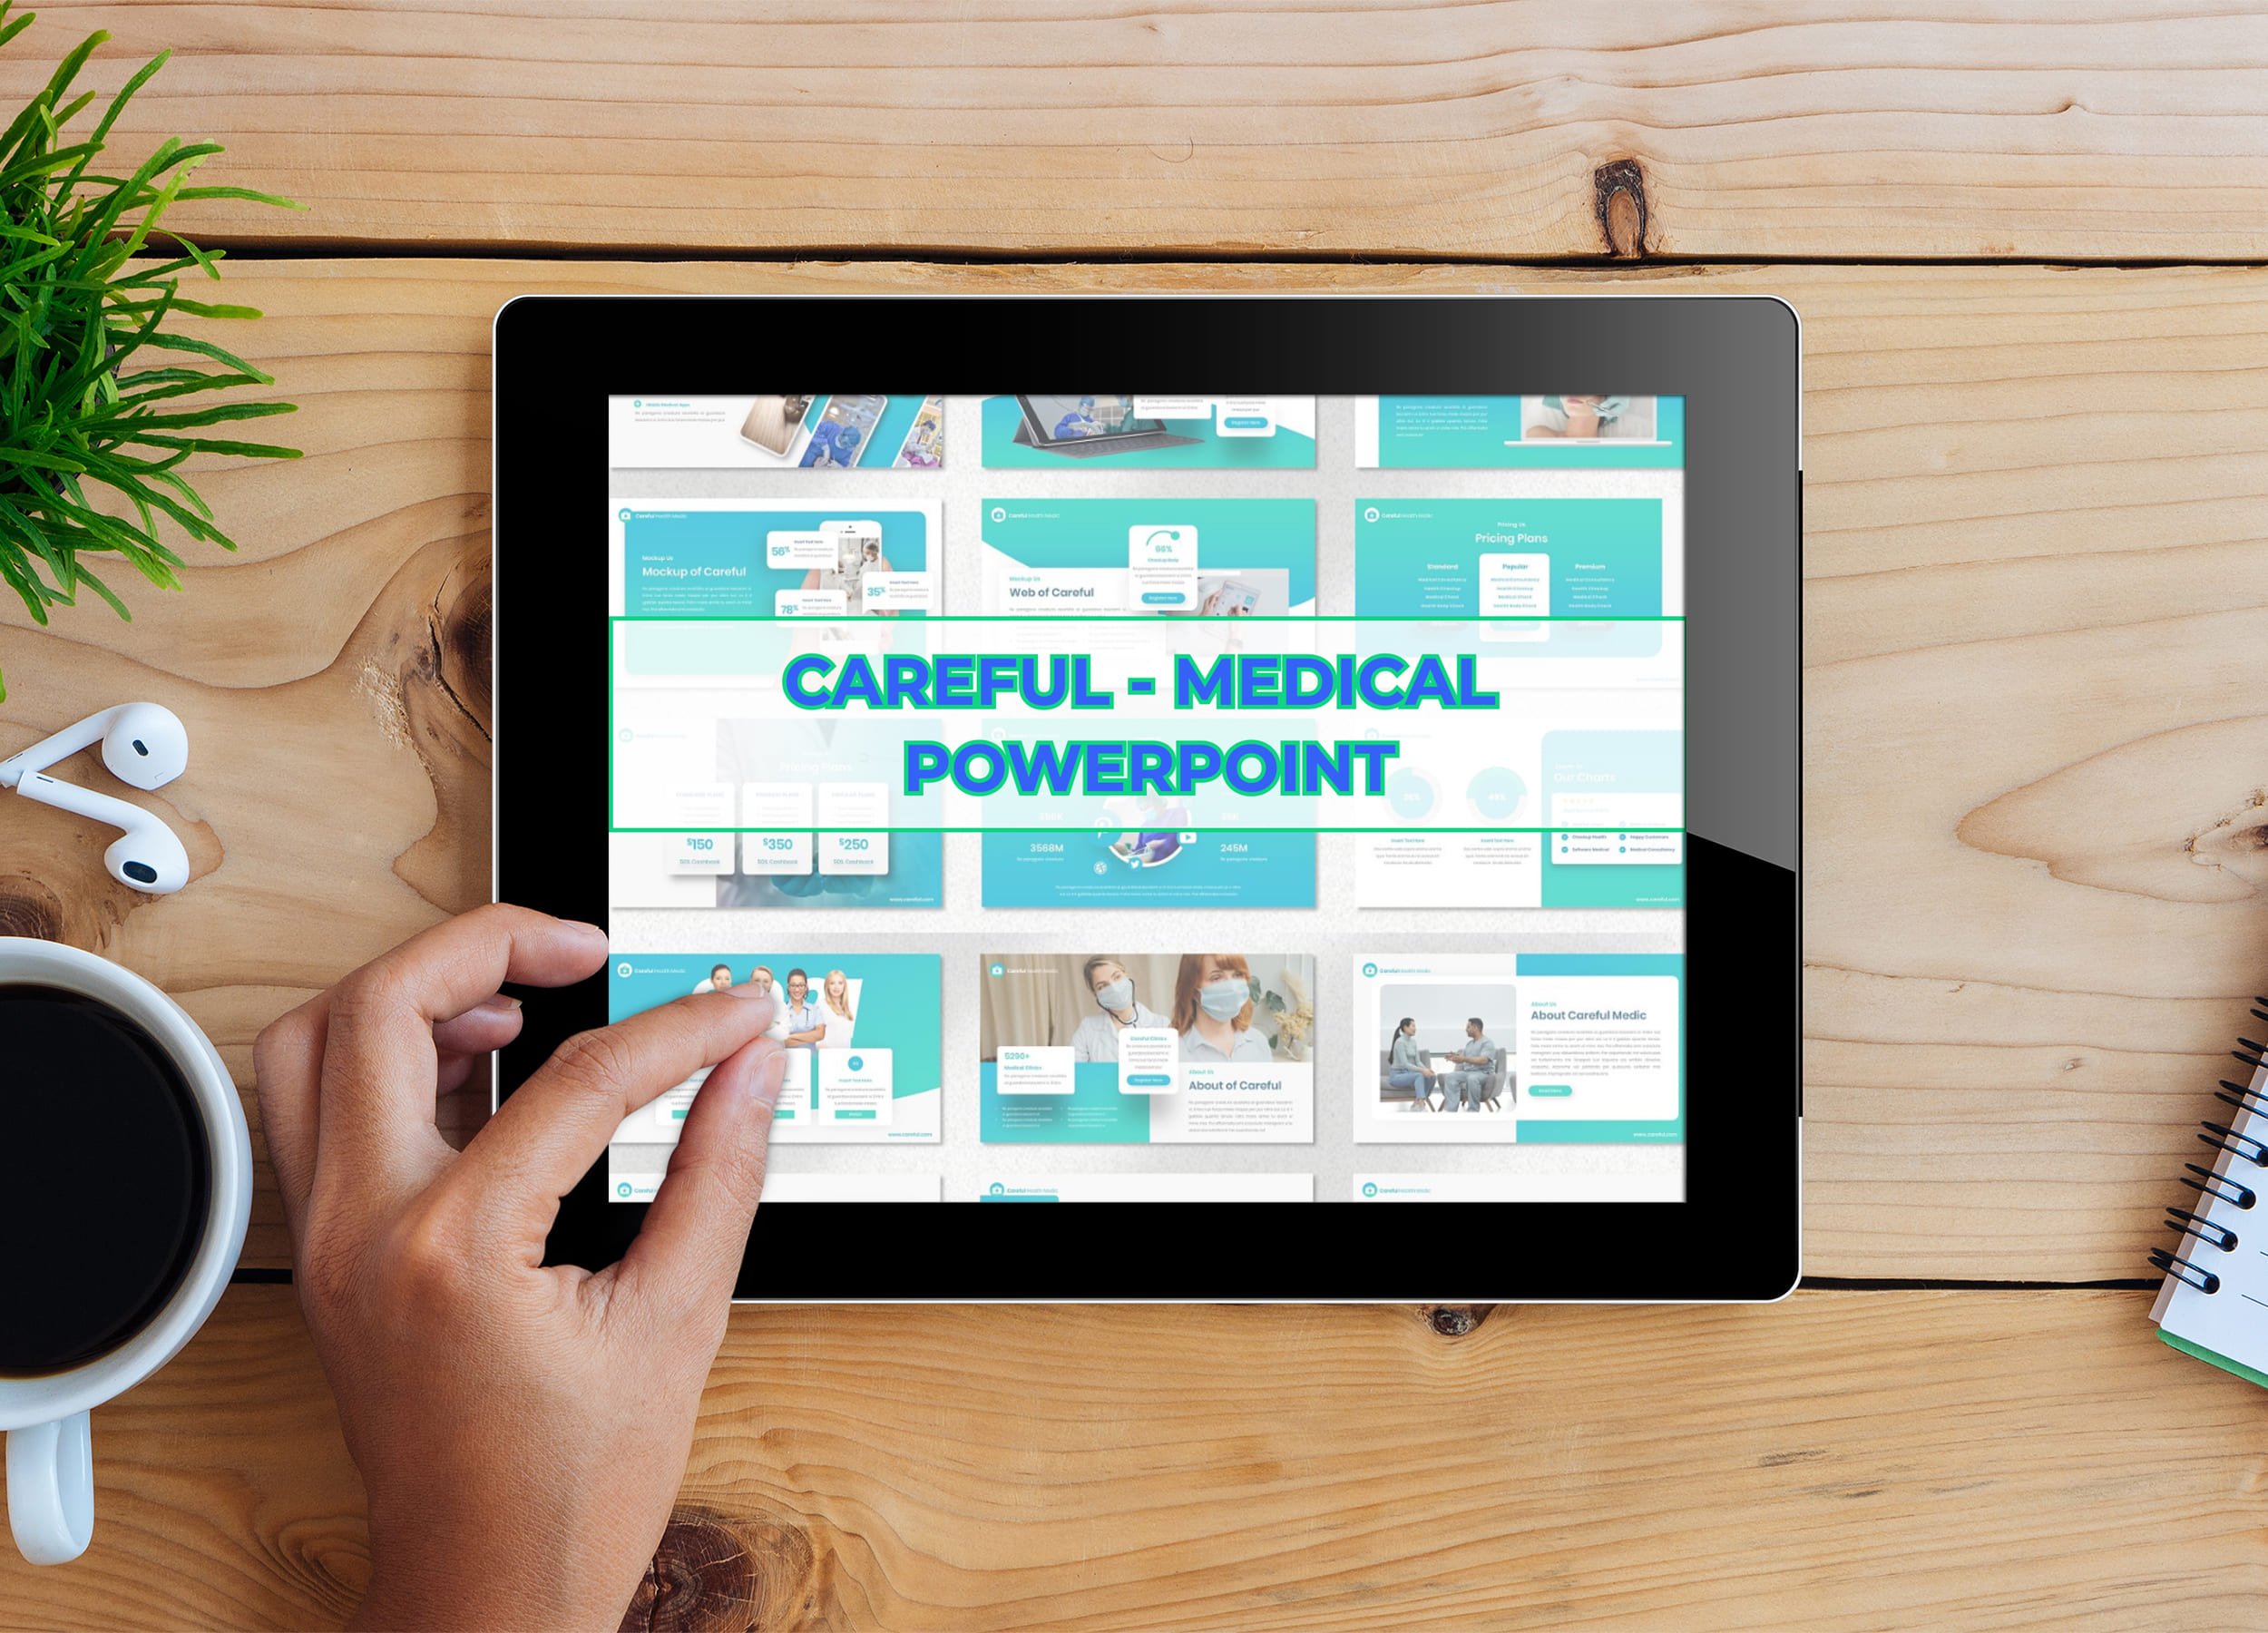 Tablet option of the Careful - Medical Powerpoint.